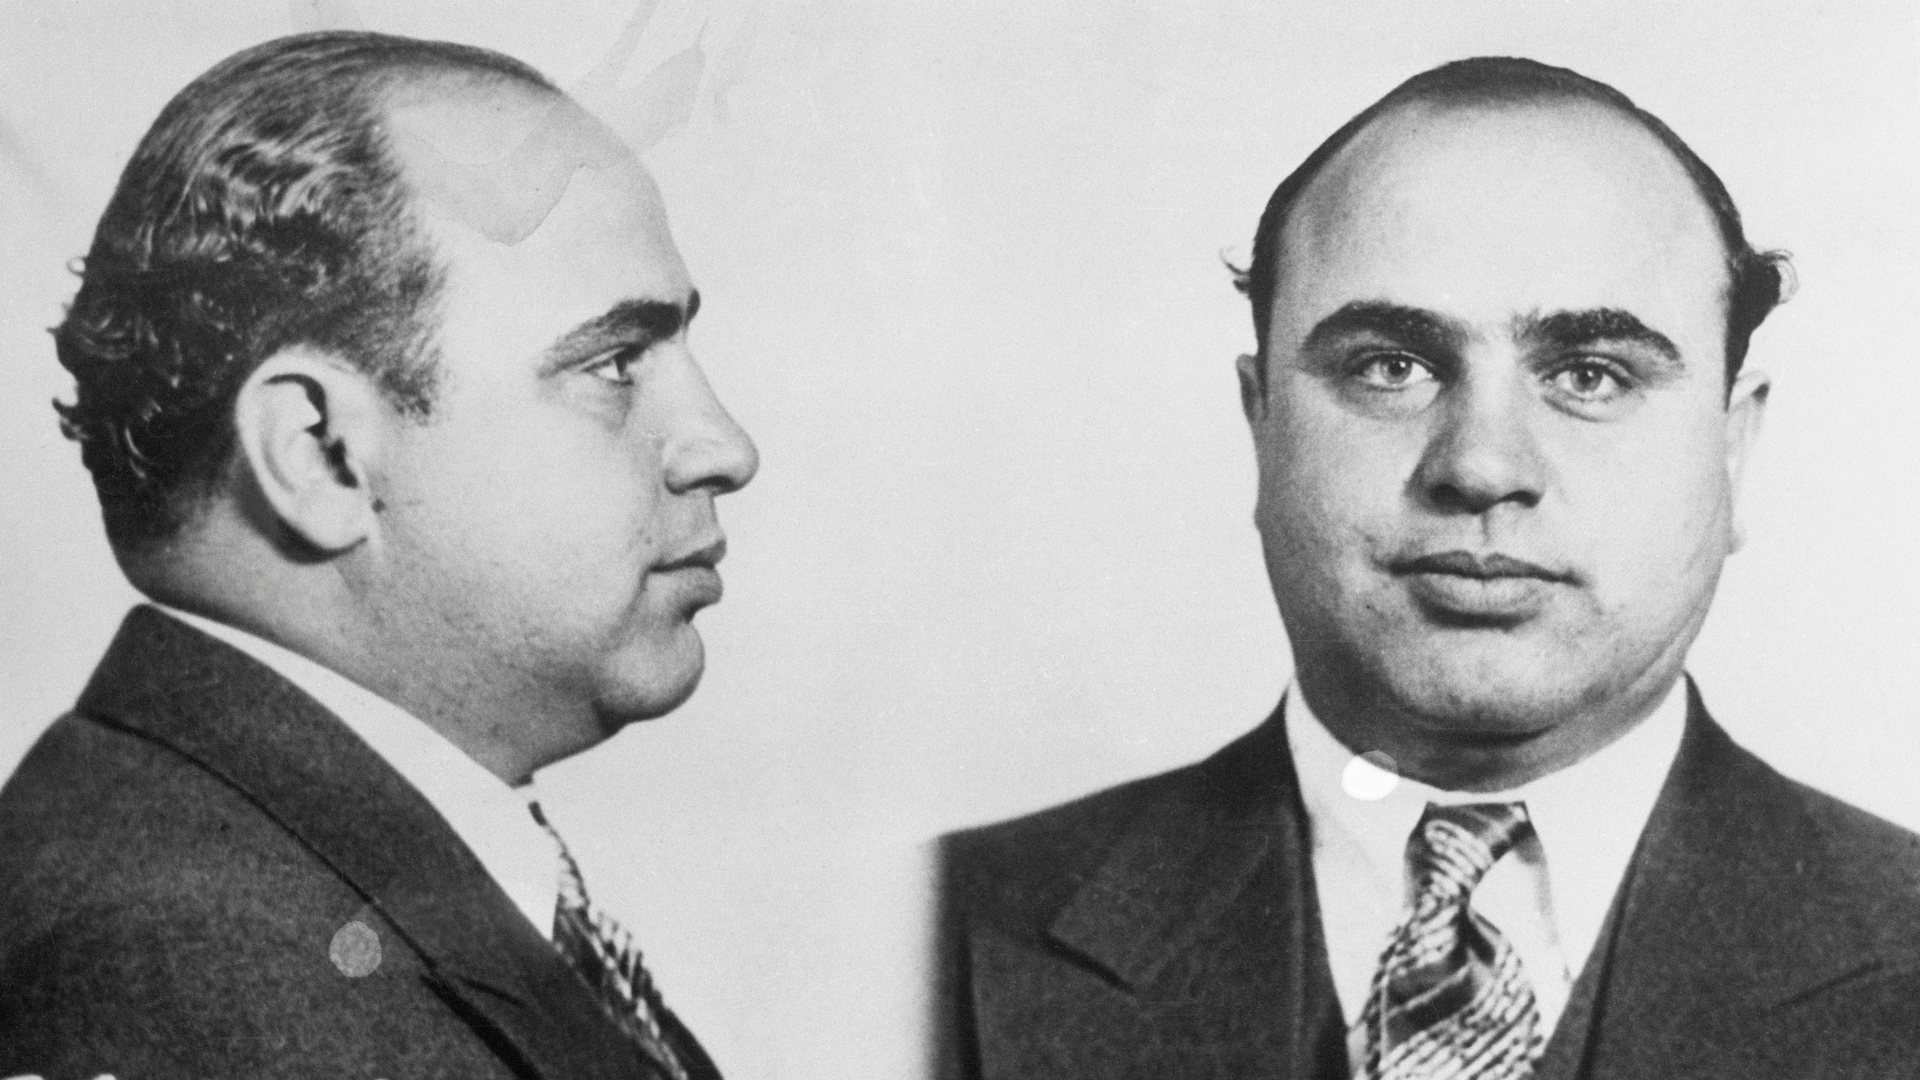 These photos of Al Capone were made by the Bureau of identification of the Chicago police department, immediately after his arrest